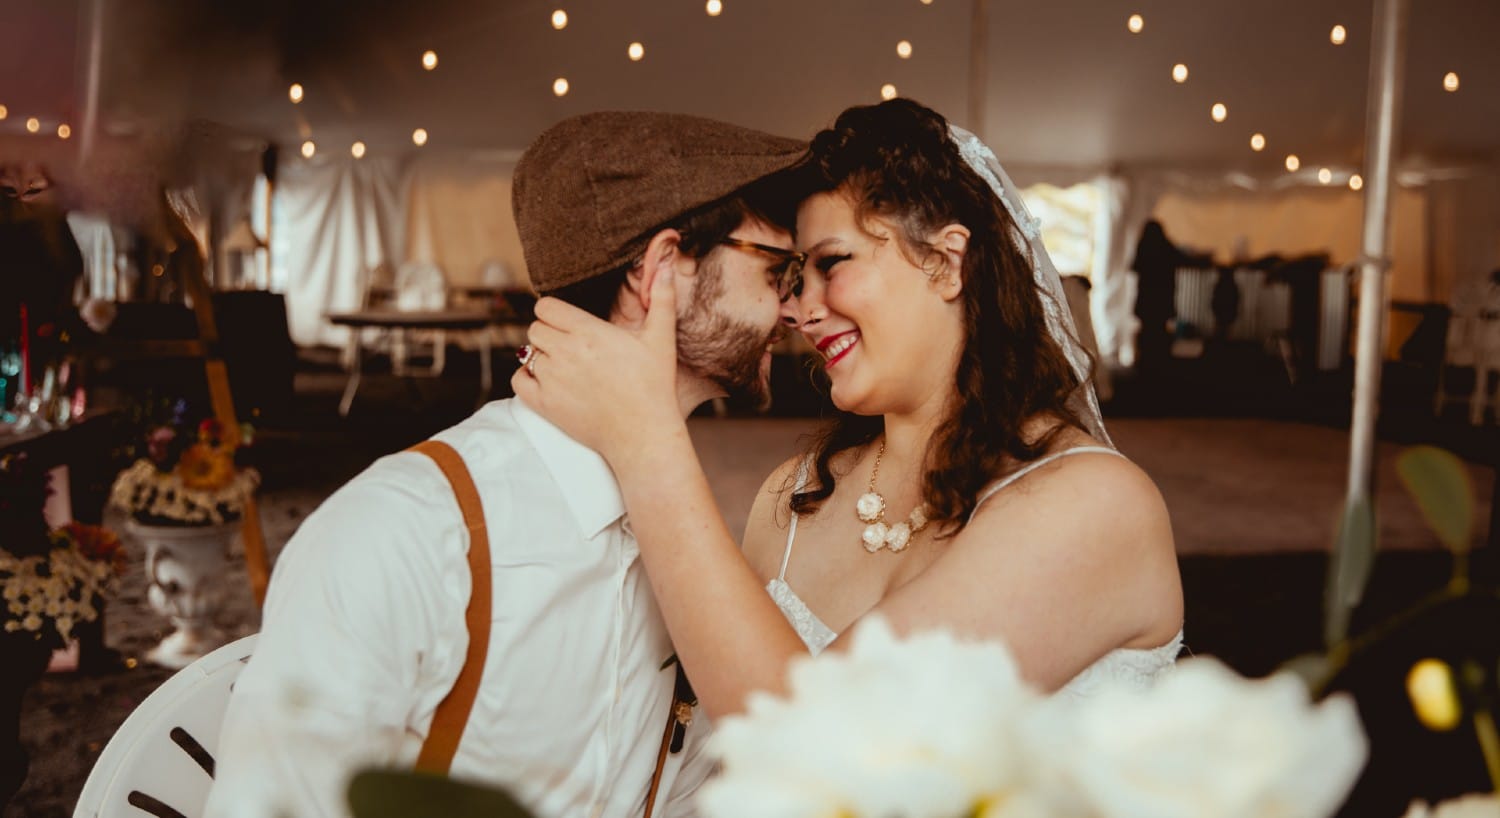 A bride and groom looking into each other's eyes in a white reception tent with string lights